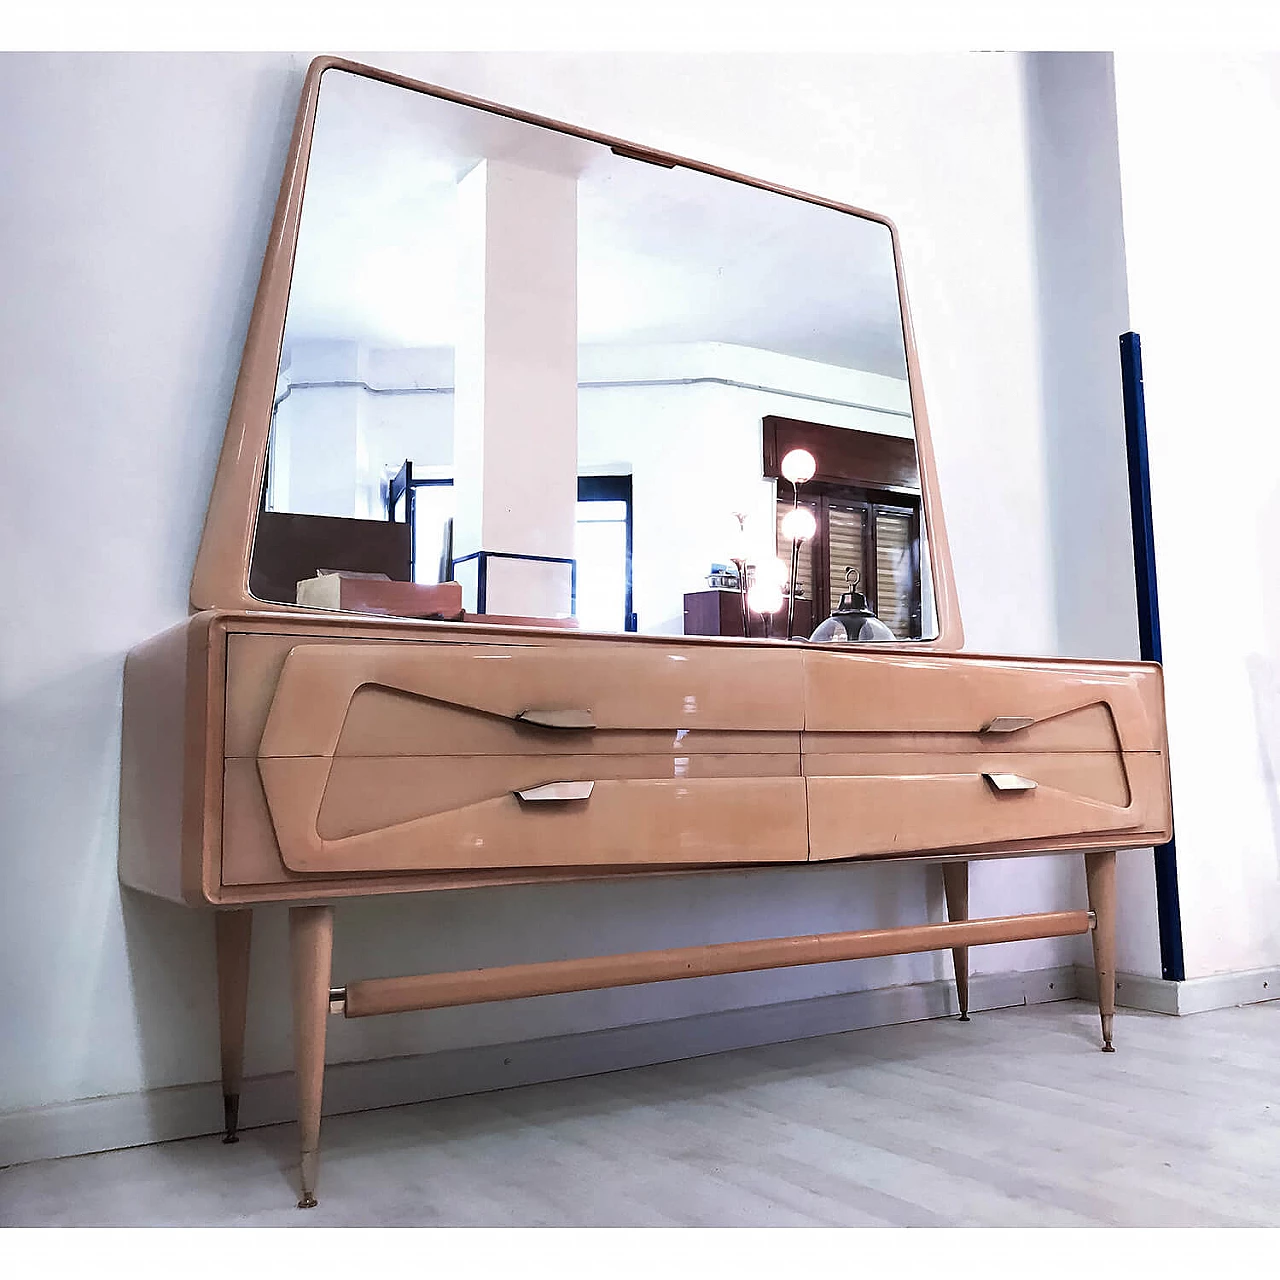 Maple chest of drawers with mirror, by Silvio Cavatorta, 1950s 1079183